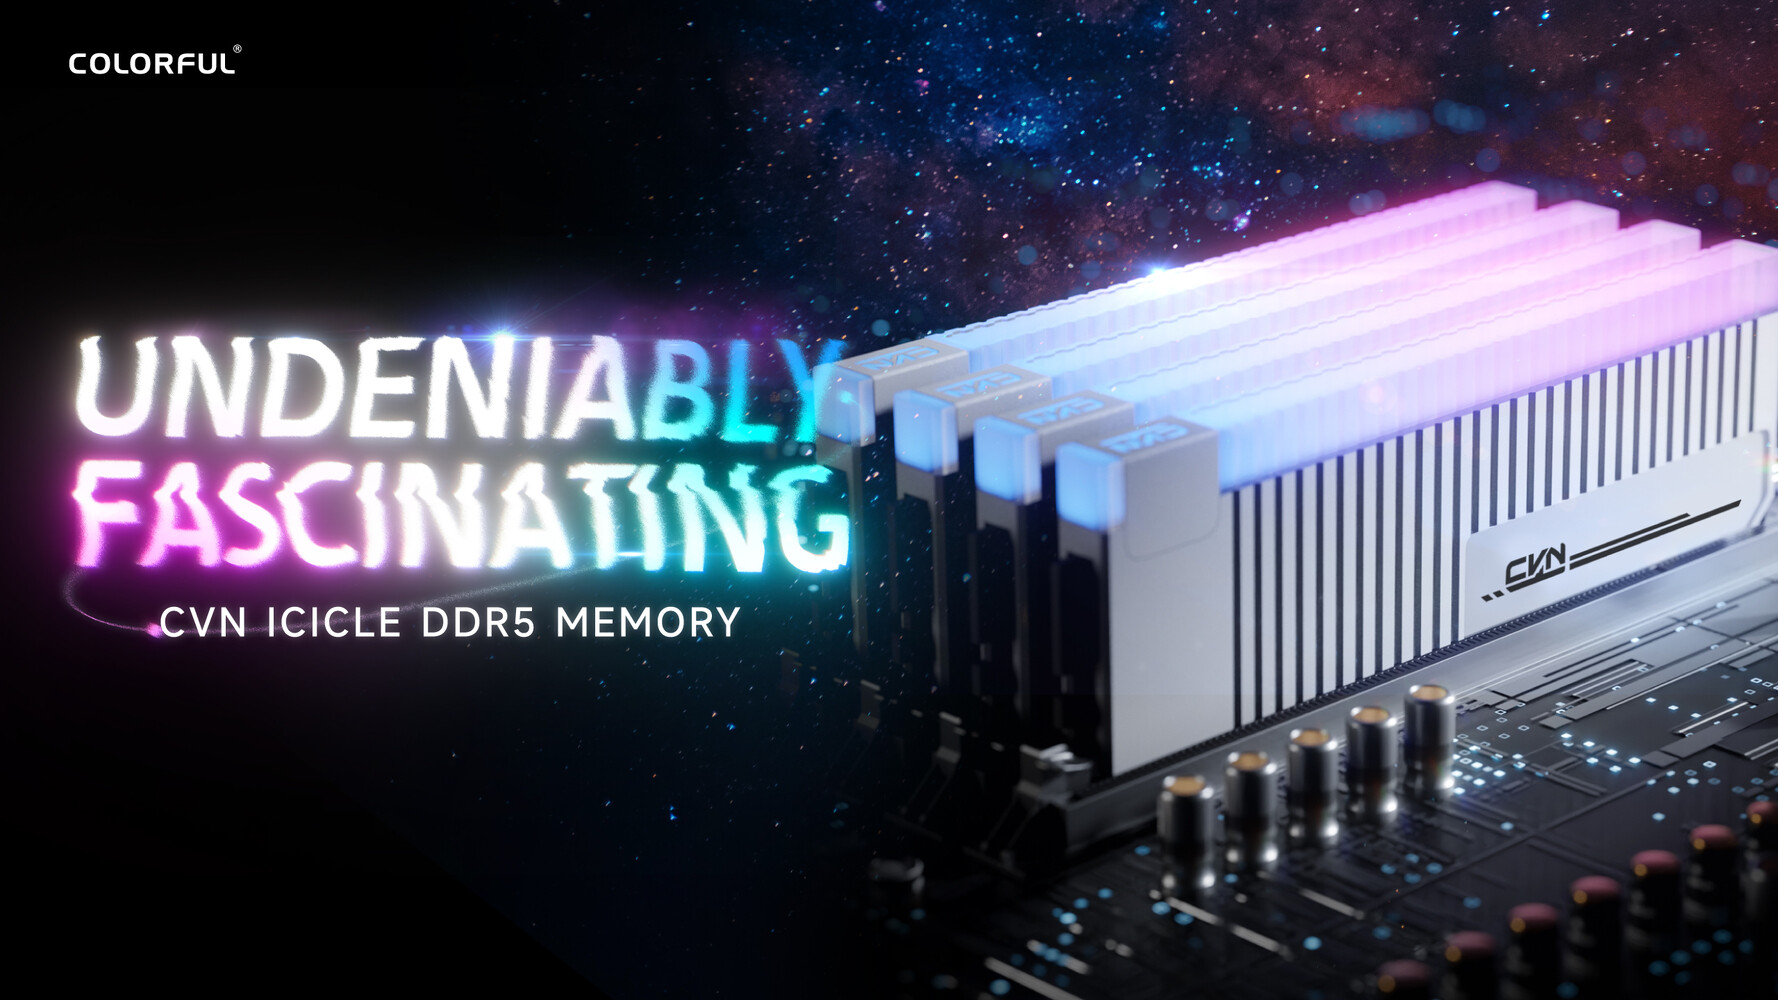 For enthusiasts and overclockers, COLORFUL has launched CVN ICICLE DDR5 Memory.